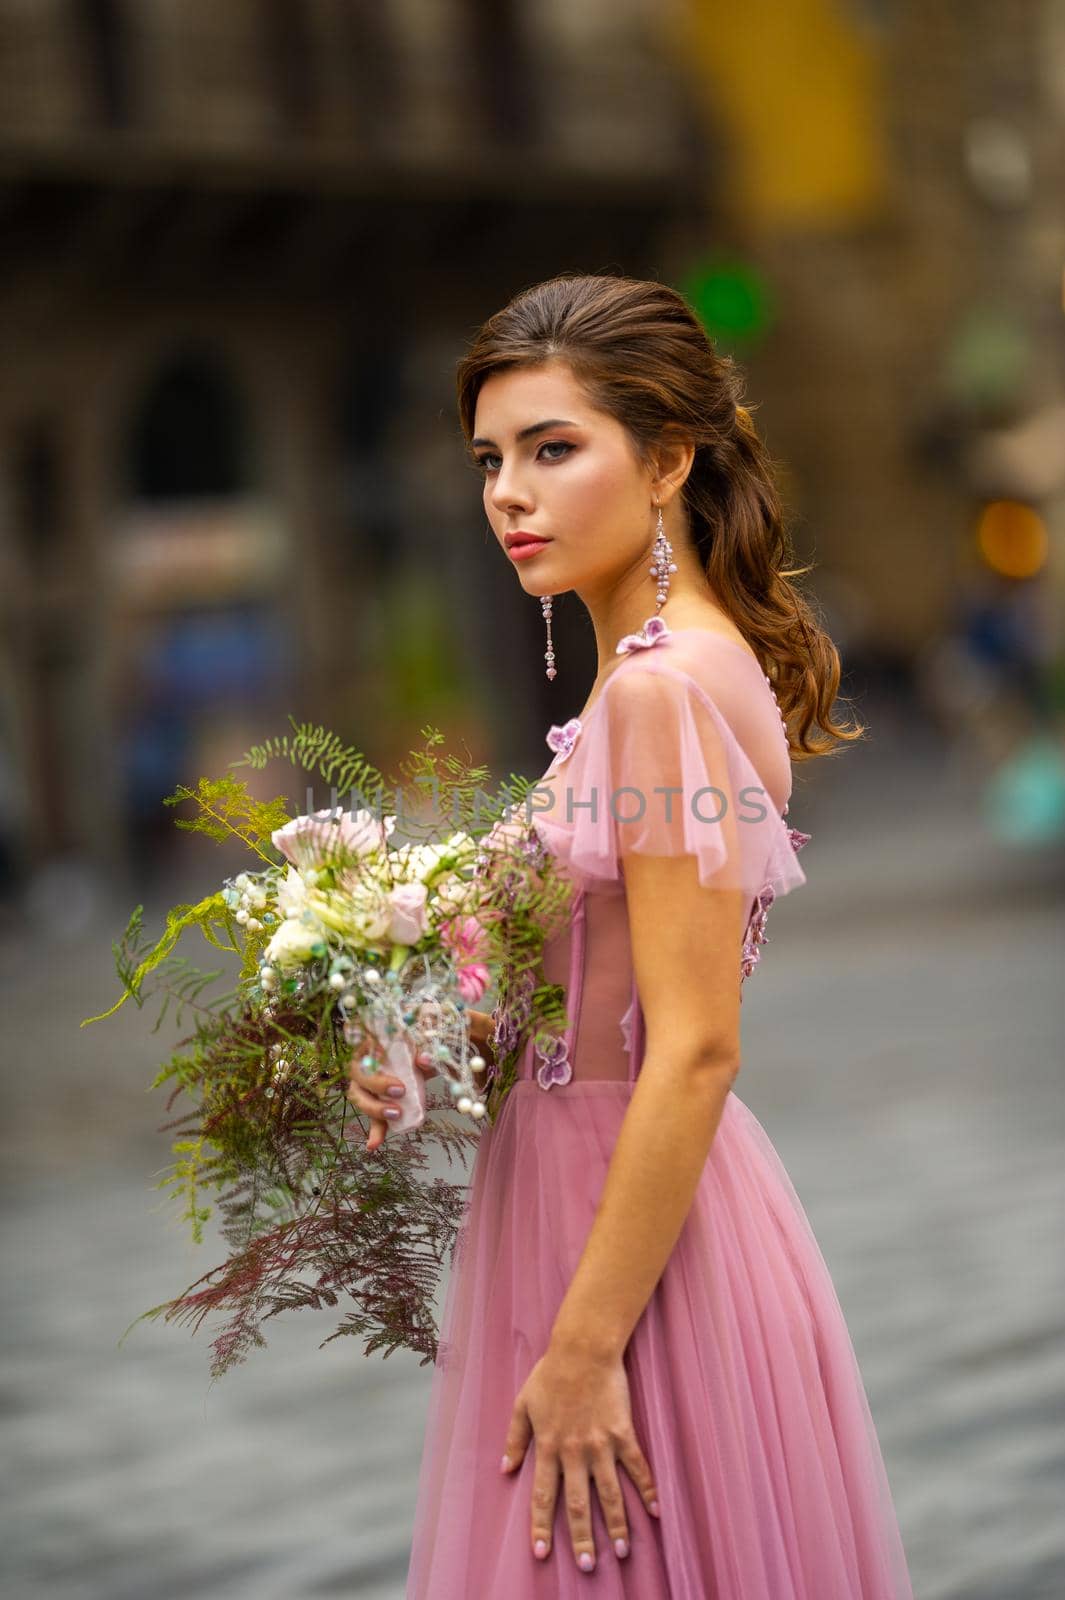 A bride in a pink dress with a bouquet stands in the center of the Old City of Florence in Italy.